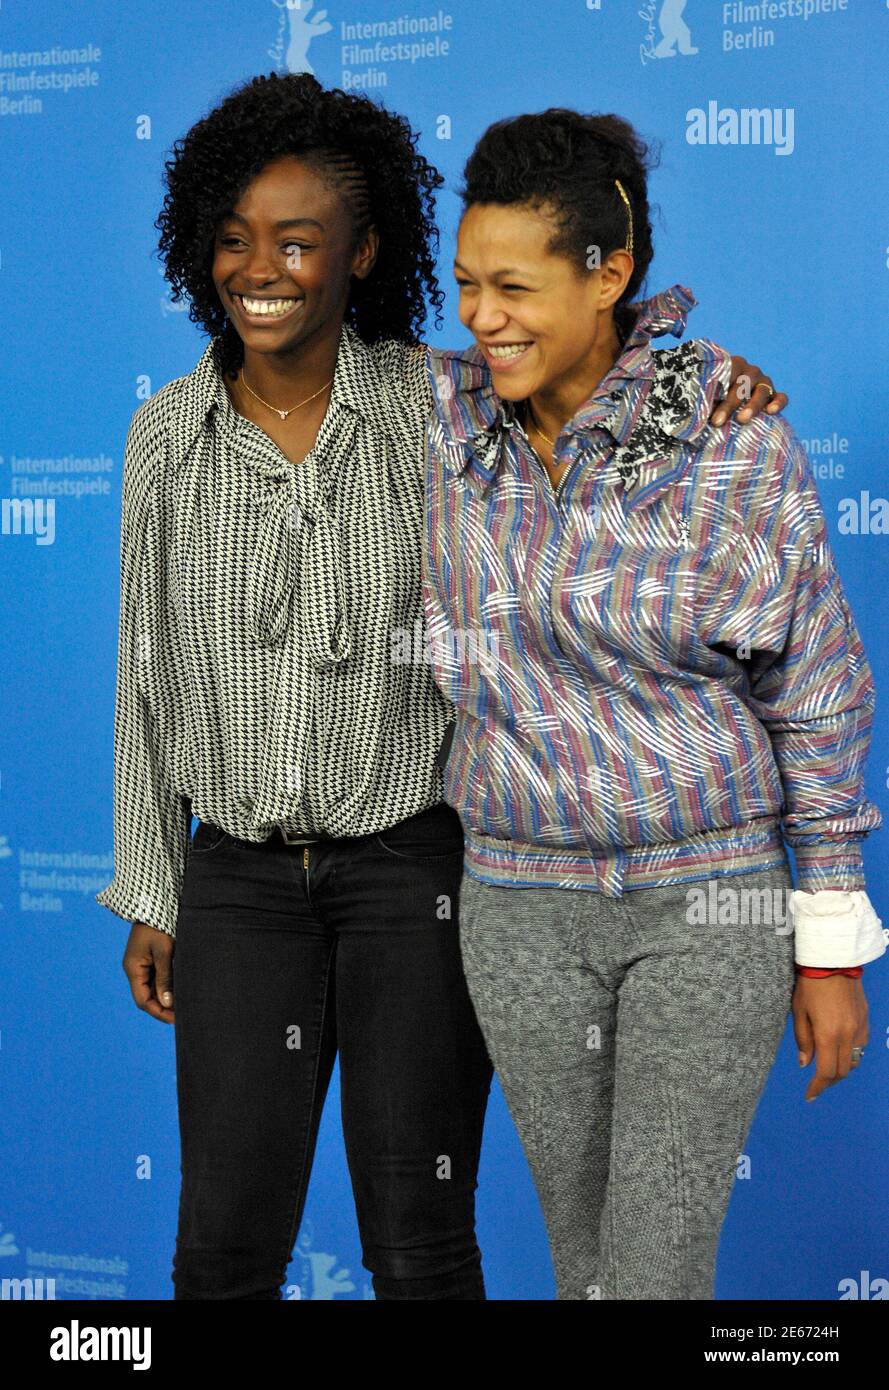 Actresses Aissa Maiga (L) and Anisia Uzeyman attend a photocall to promote the movie "Aujourd'hui - Tey" at the 62nd Berlinale International Film Festival in Berlin February 10, 2012.  REUTERS/Morris Mac Matzen  (GERMANY - Tags: ENTERTAINMENT) Stock Photo